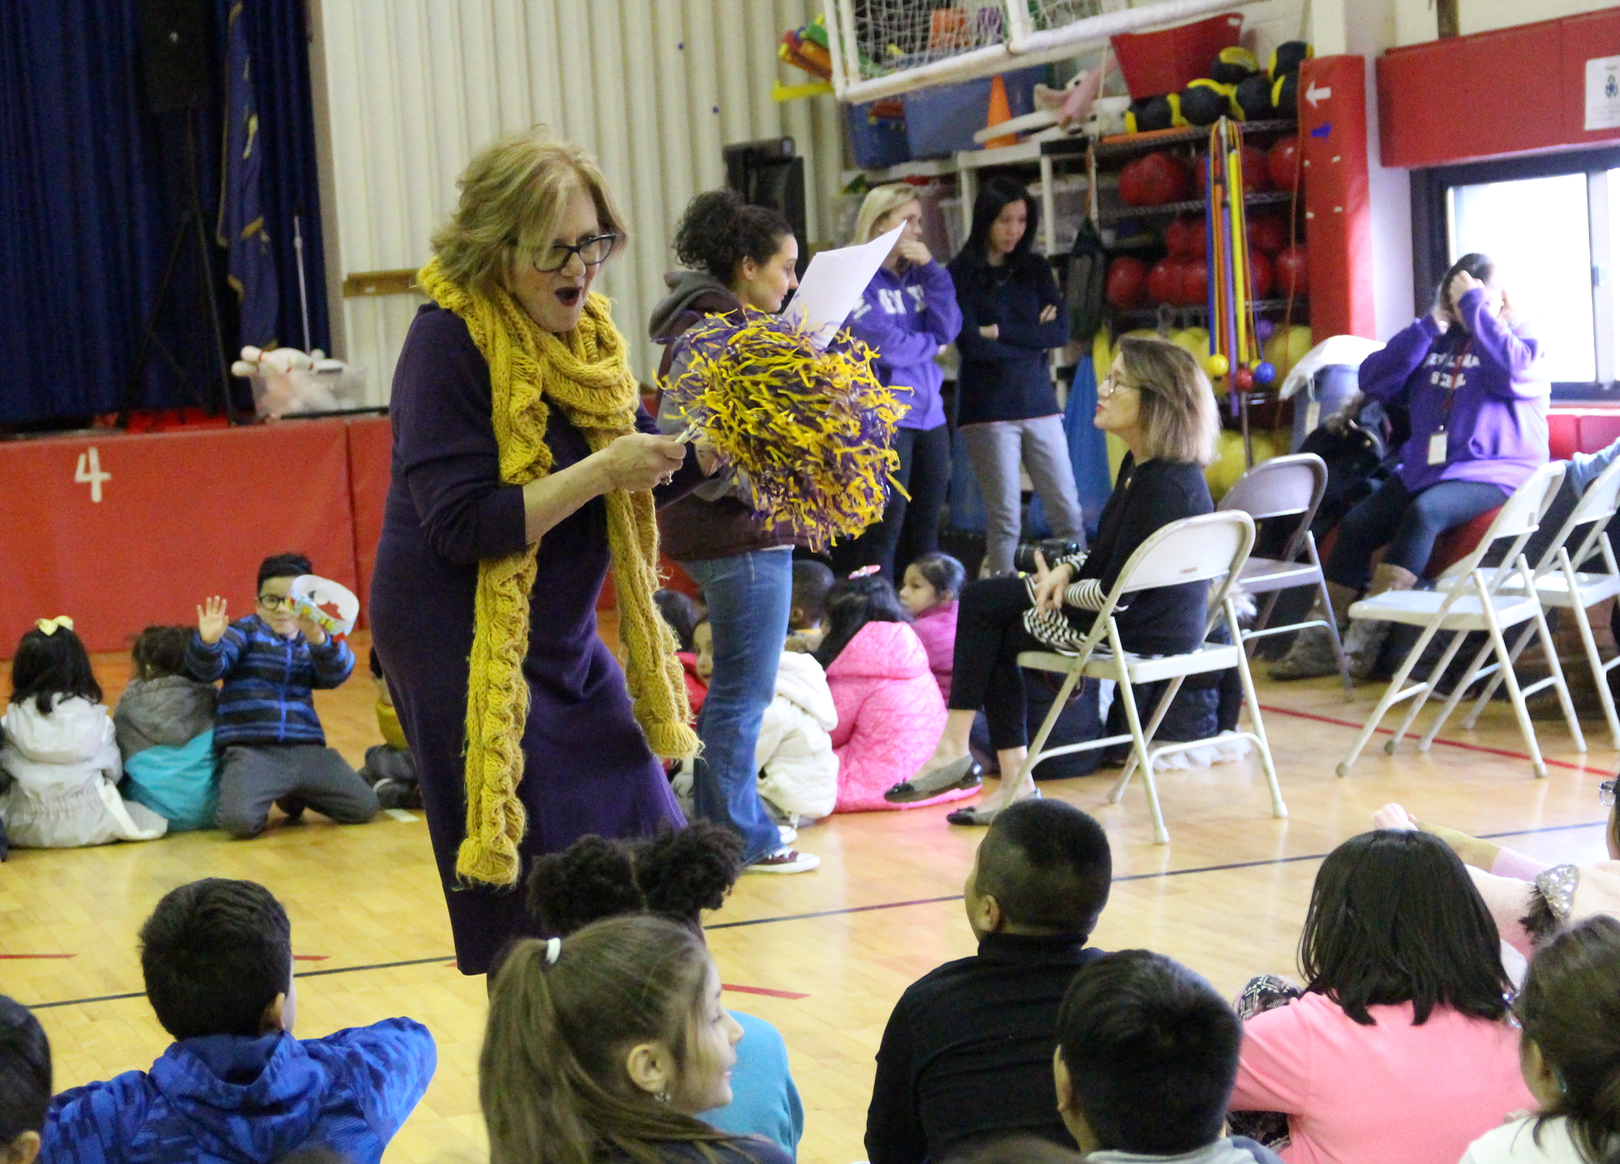 New Lebanon School principal Barbara Ricchio dressed in the school colors purple and gold, gets the kids excited for a celebration of school norms. Dec 19, 2018 Photo: Leslie Yager